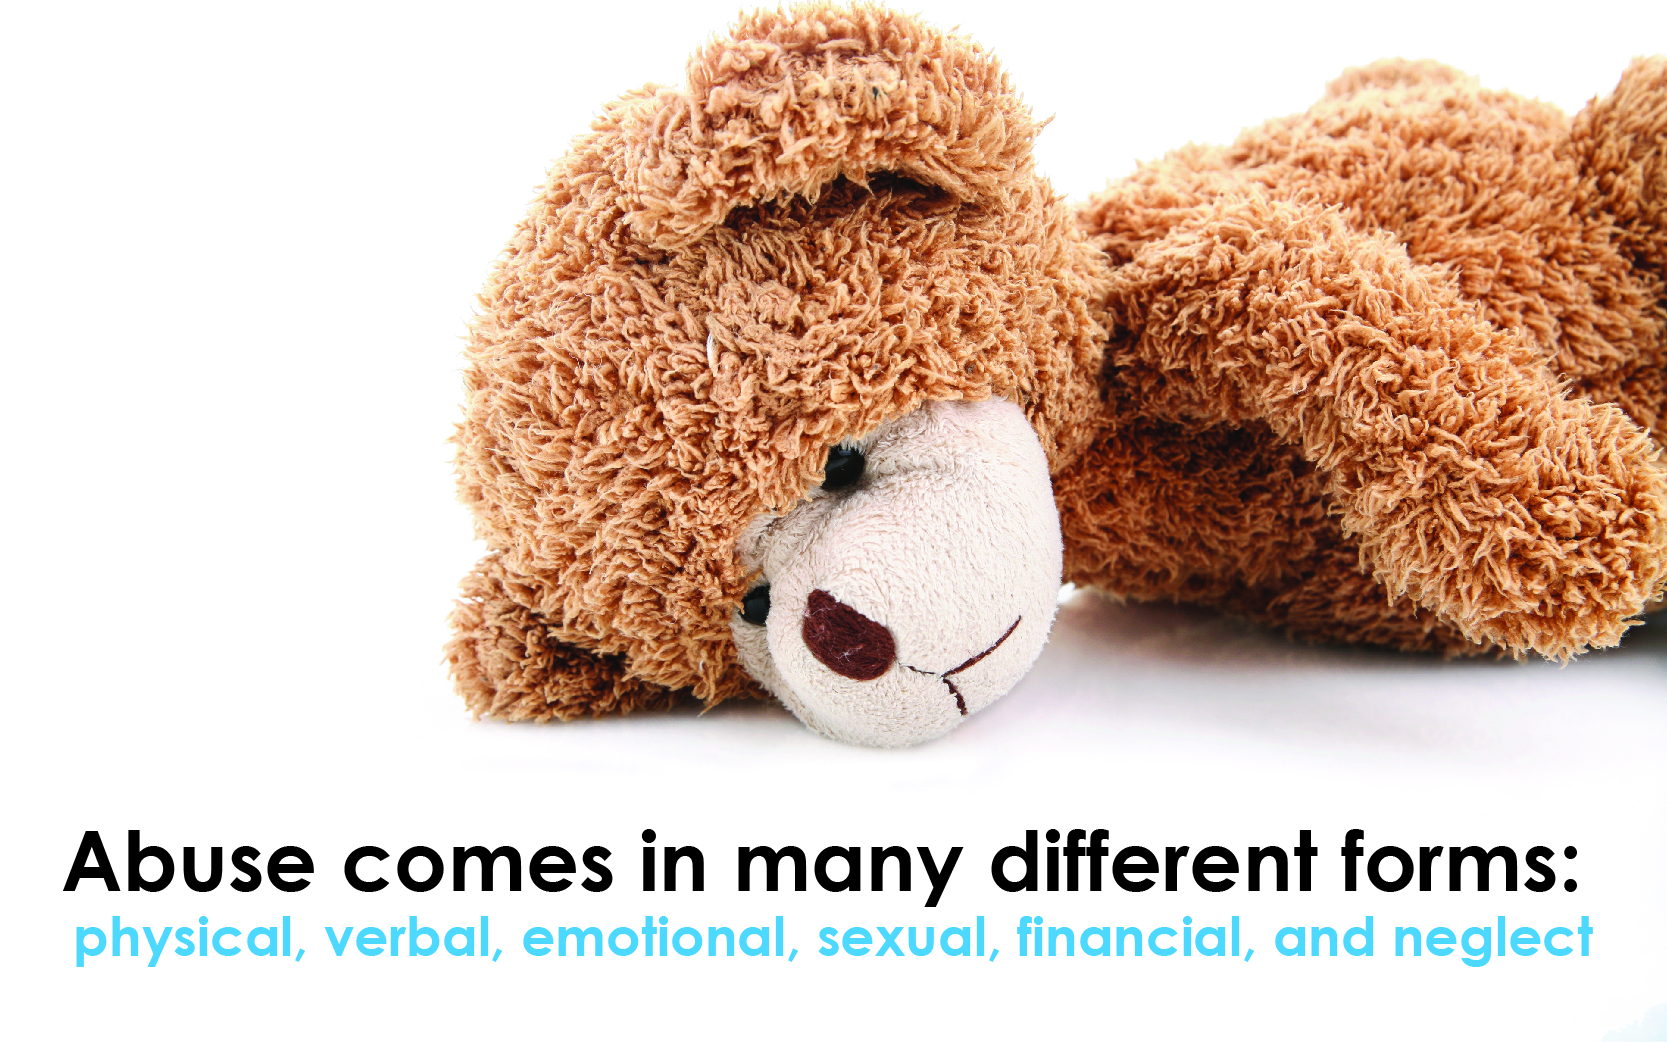 image of a fallen teddy bear. text reads: abuse comes in many different forms, physical verbal, sexual, emotional, financial, and neglect